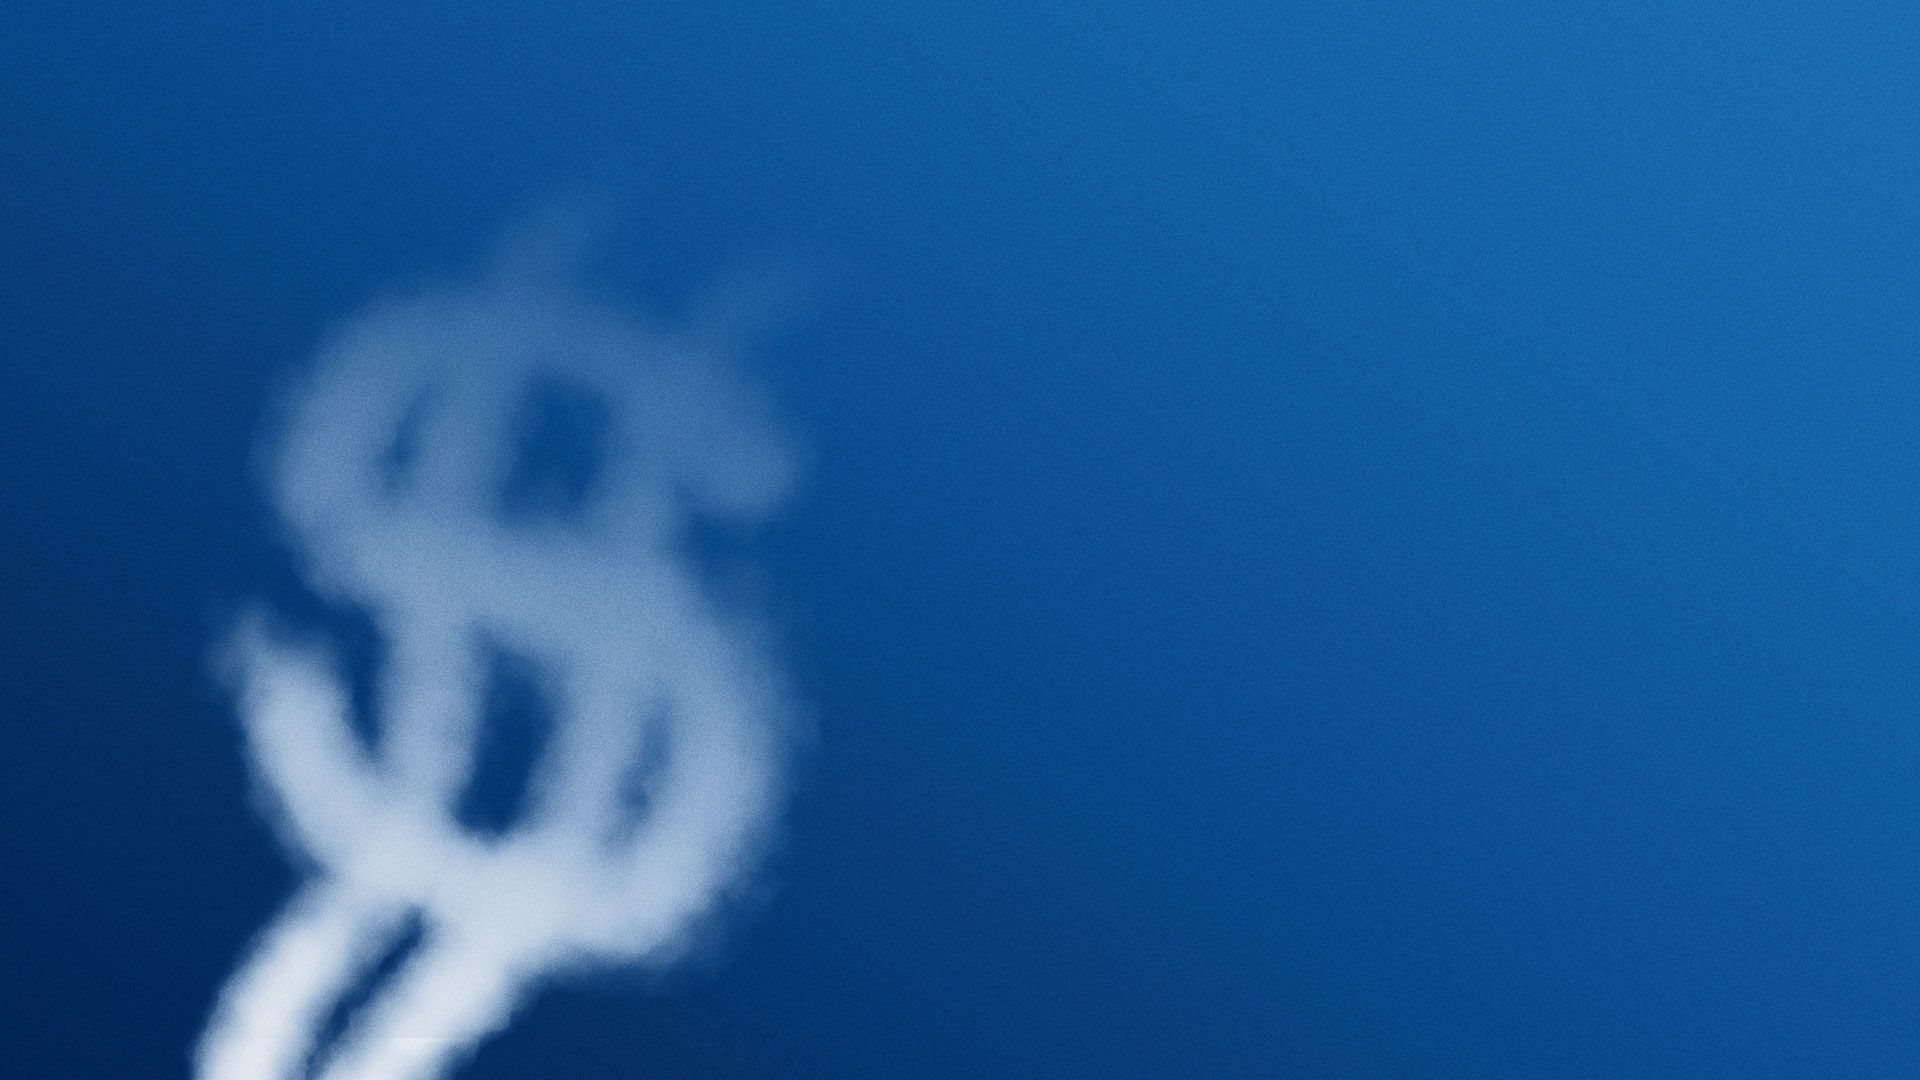 Illustration of cloud dollar sign disappearing into the air